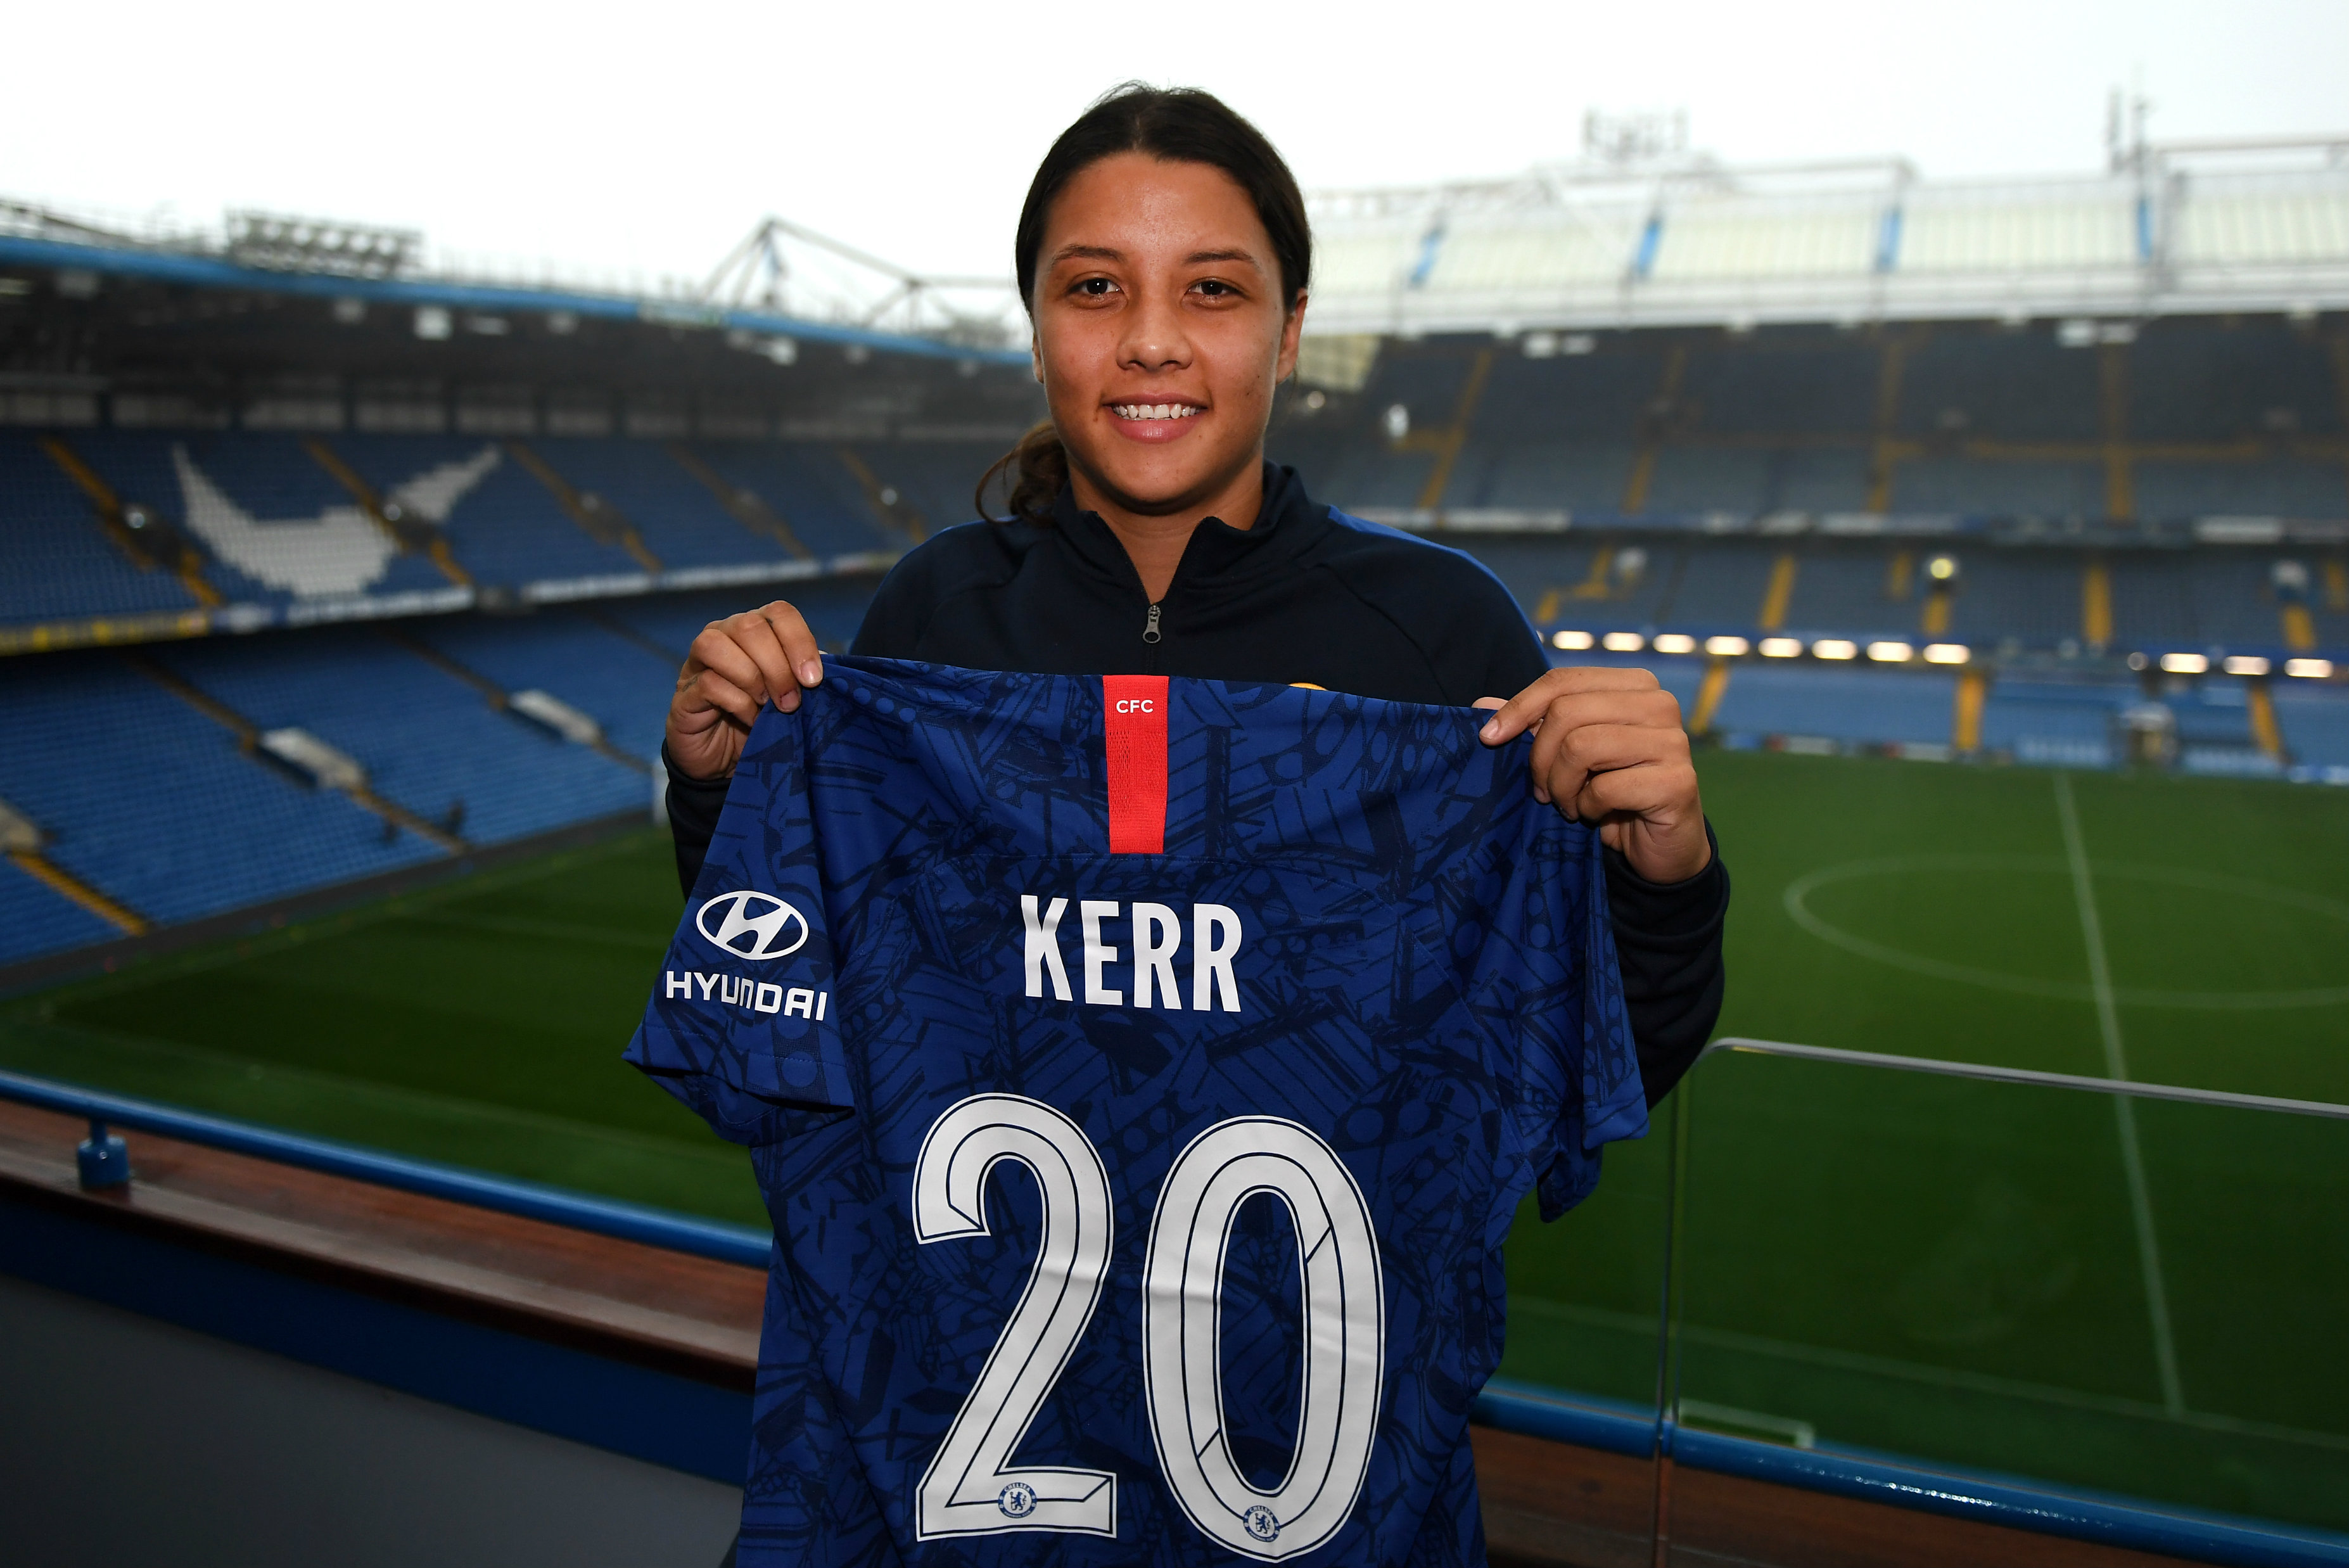 Sam Kerr with Chelsea jersey